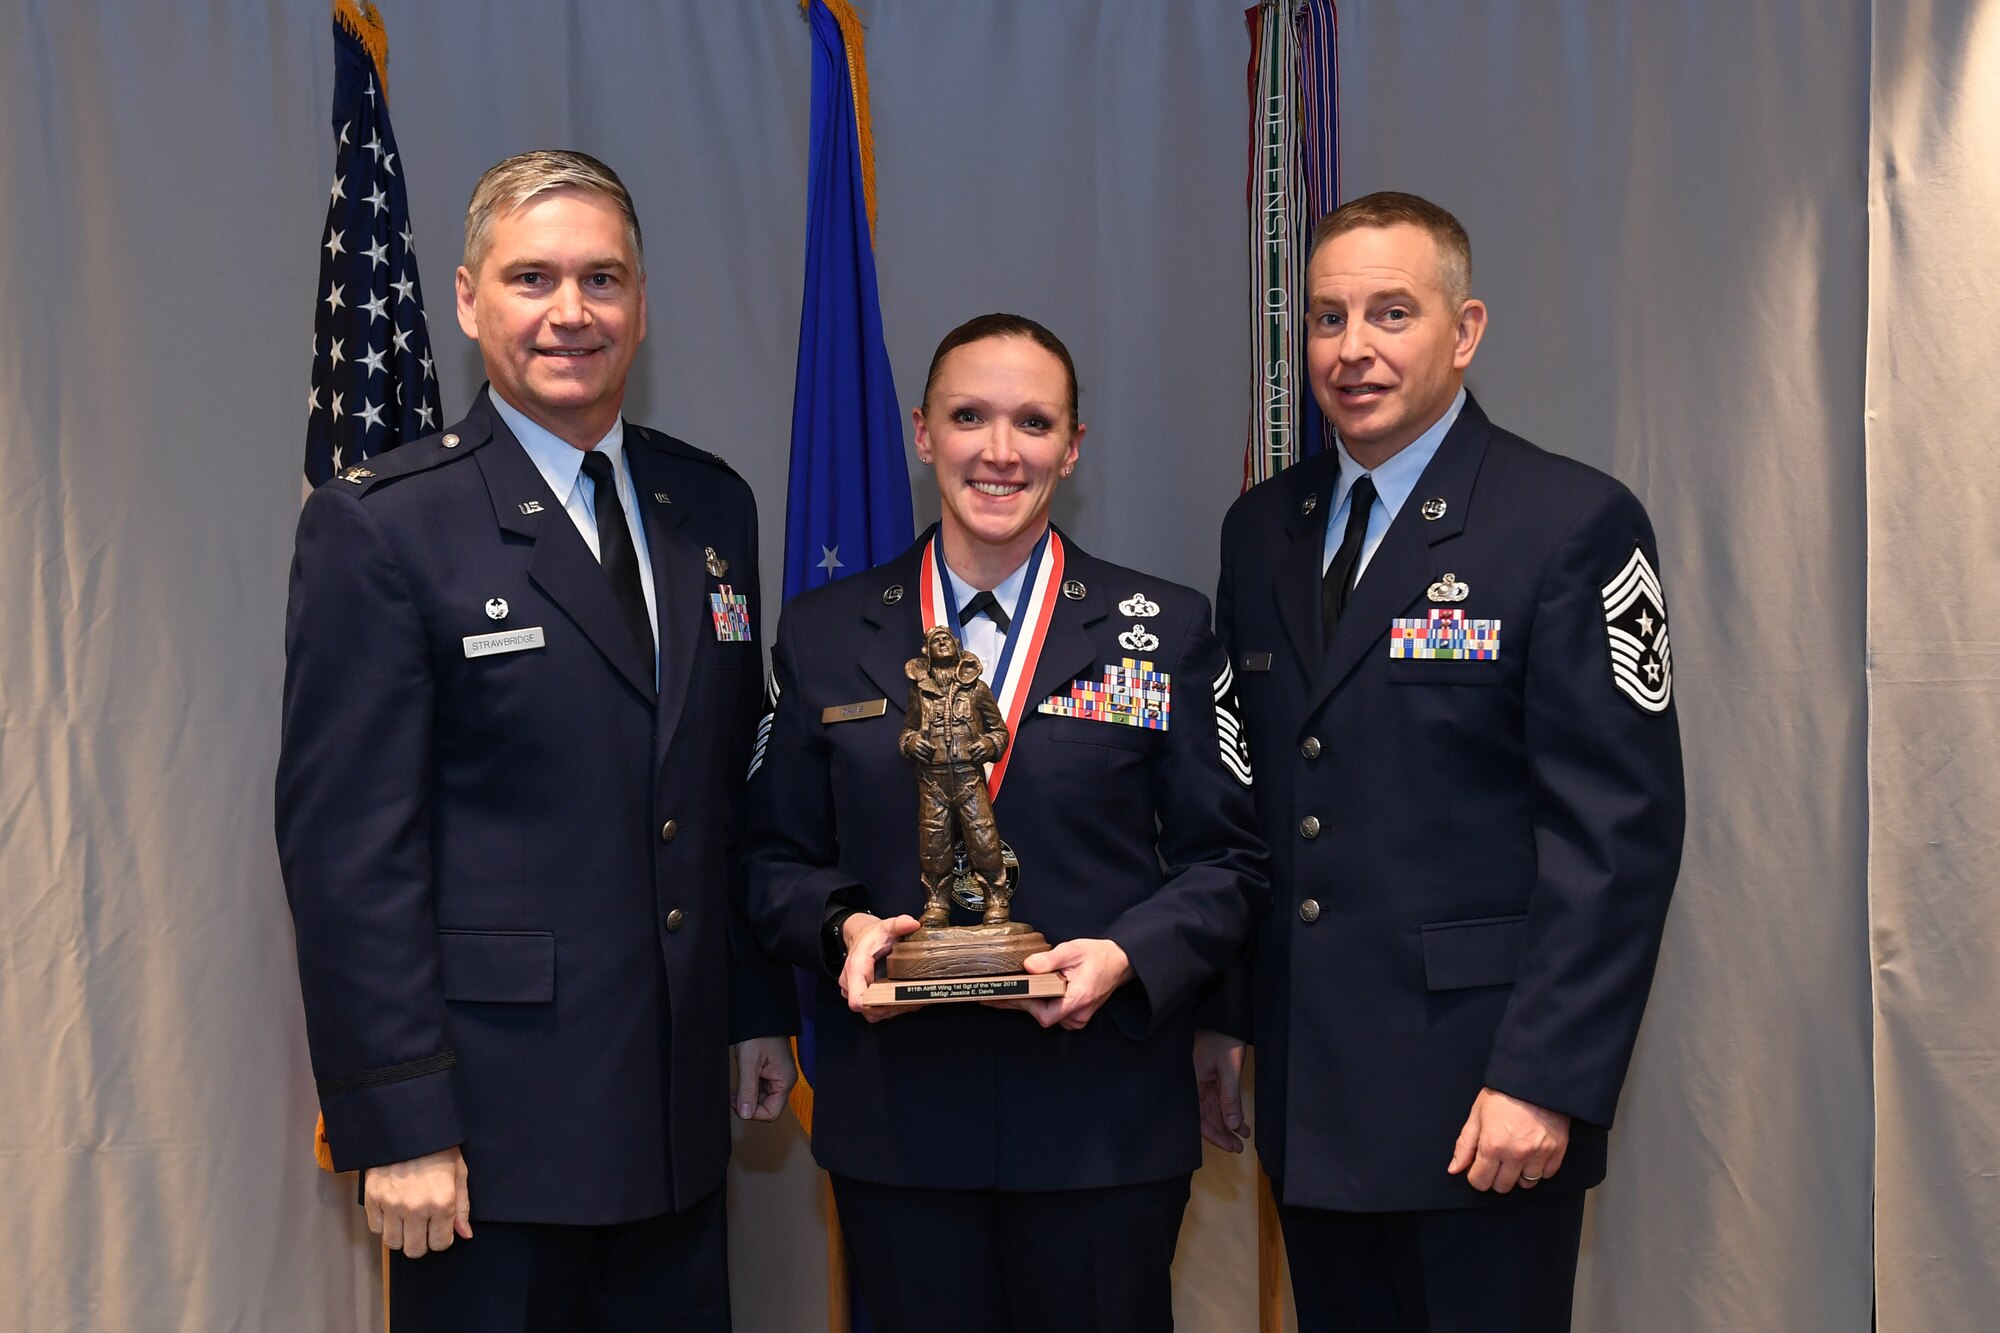 Senior Master Sgt. Jessica Davis, installation emergency manager with the 32nd Aerial Port Squadron, is awarded 911th Airlift Wing First Sergeant of the Year by Col. Douglas N. Strawbridge, commander of the 911th AW, and Chief Master Sgt. Christopher D. Neitzel, command chief of the 911th AW, during the 911th AW Annual Award Ceremony at the Pittsburgh International Airport Air Reserve Station, Pennsylvania, March 2, 2019. The 2018 awards ceremony recognized Airmen who went above and beyond in their service for the year 2018. (U.S. Air Force photo by Senior Airman Grace Thomson)